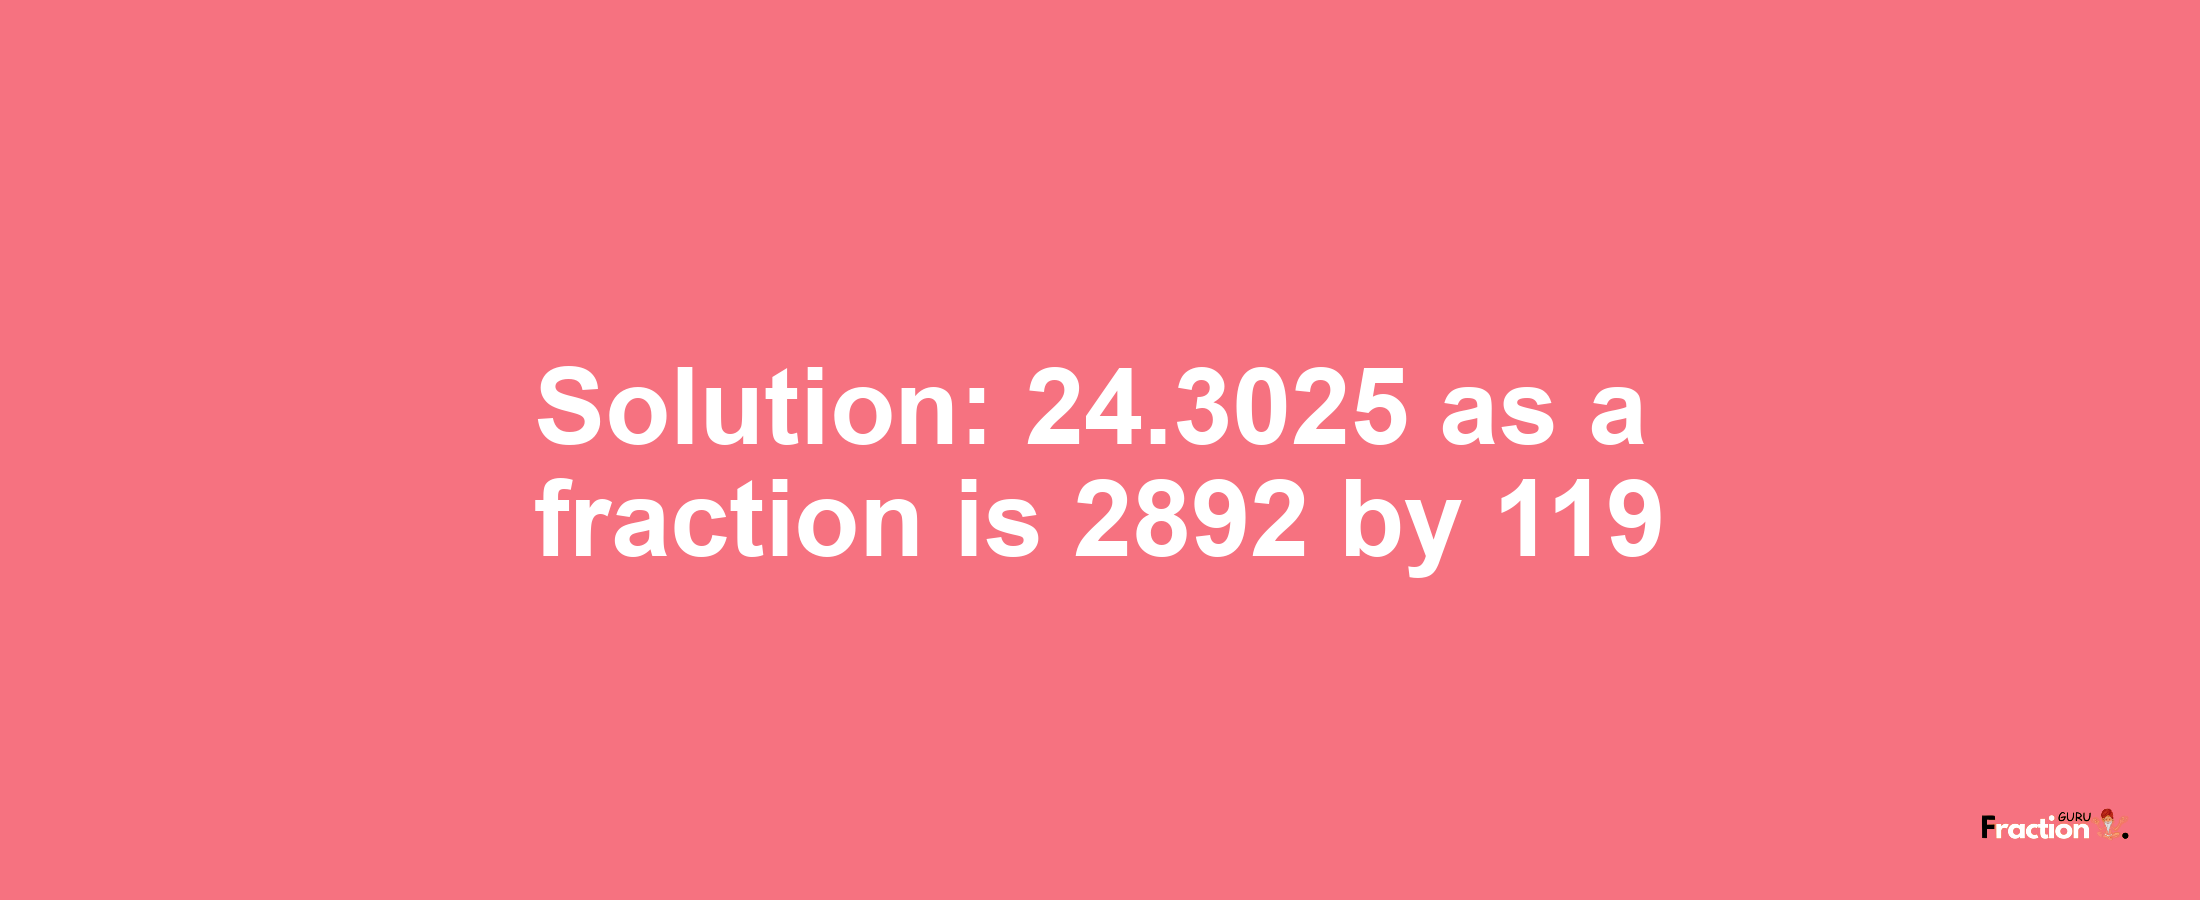 Solution:24.3025 as a fraction is 2892/119